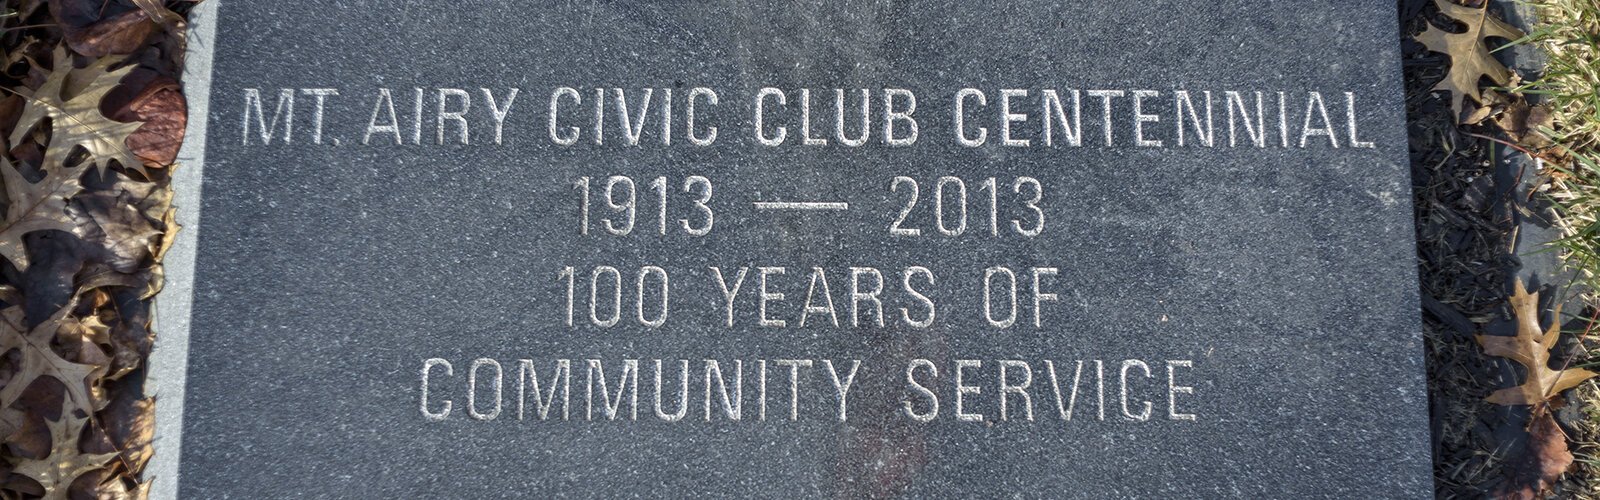 The Civic Club's 2013 centennial was commemorated by the installation of a flagpole and plaque. Mt. Airy resident and Eagle Scout Jackson Donaldson coordinated the project with Civic Club assistance.